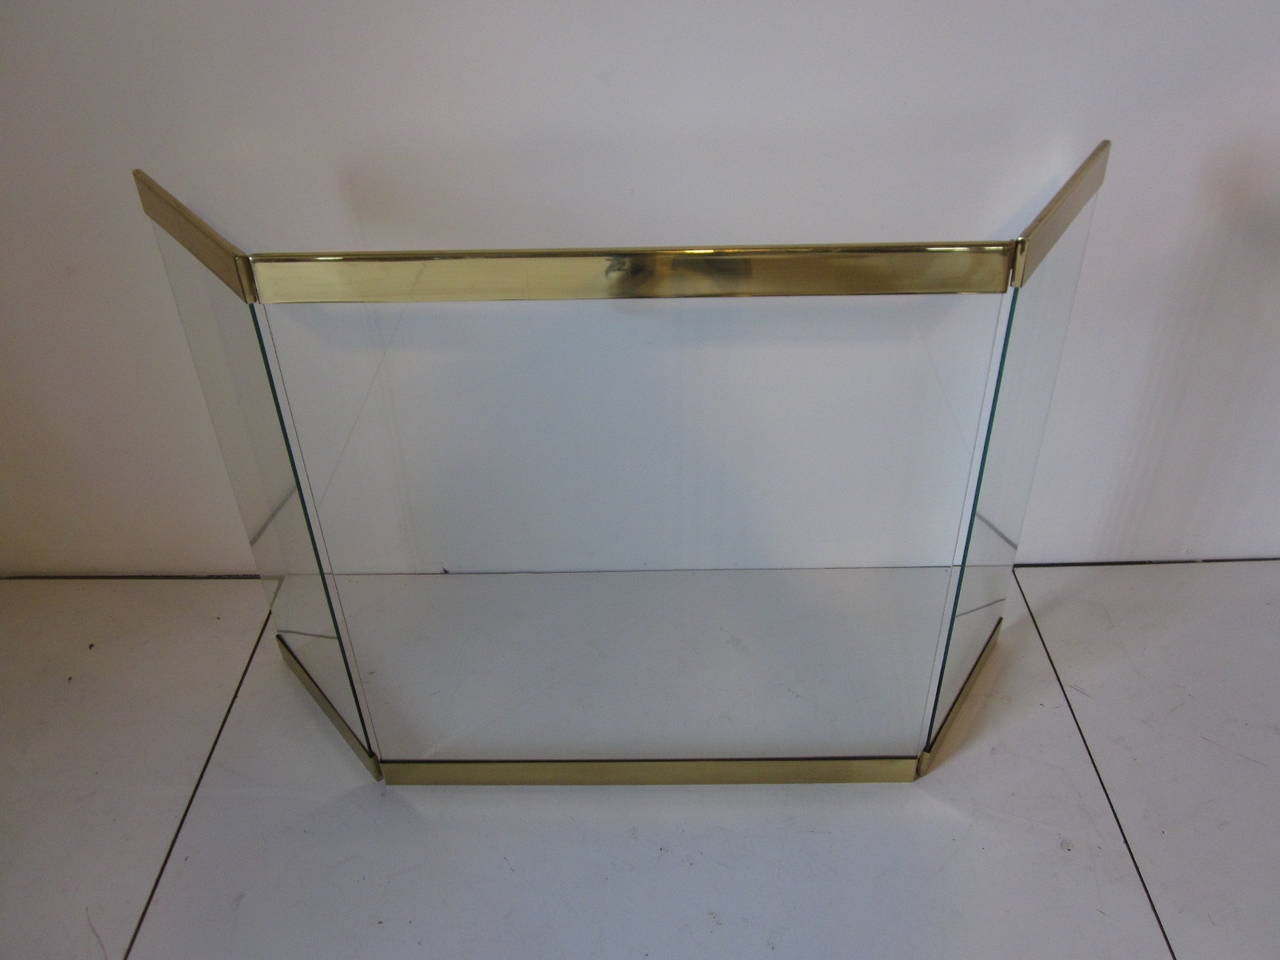 A three-panel plate-glass fireplace screen with heavy brass trim and hinges in the style of designer Leon Pace and Company with a clean modern line. The center panel is 28" and the side panels are 12" wide on each side. Retains the paper